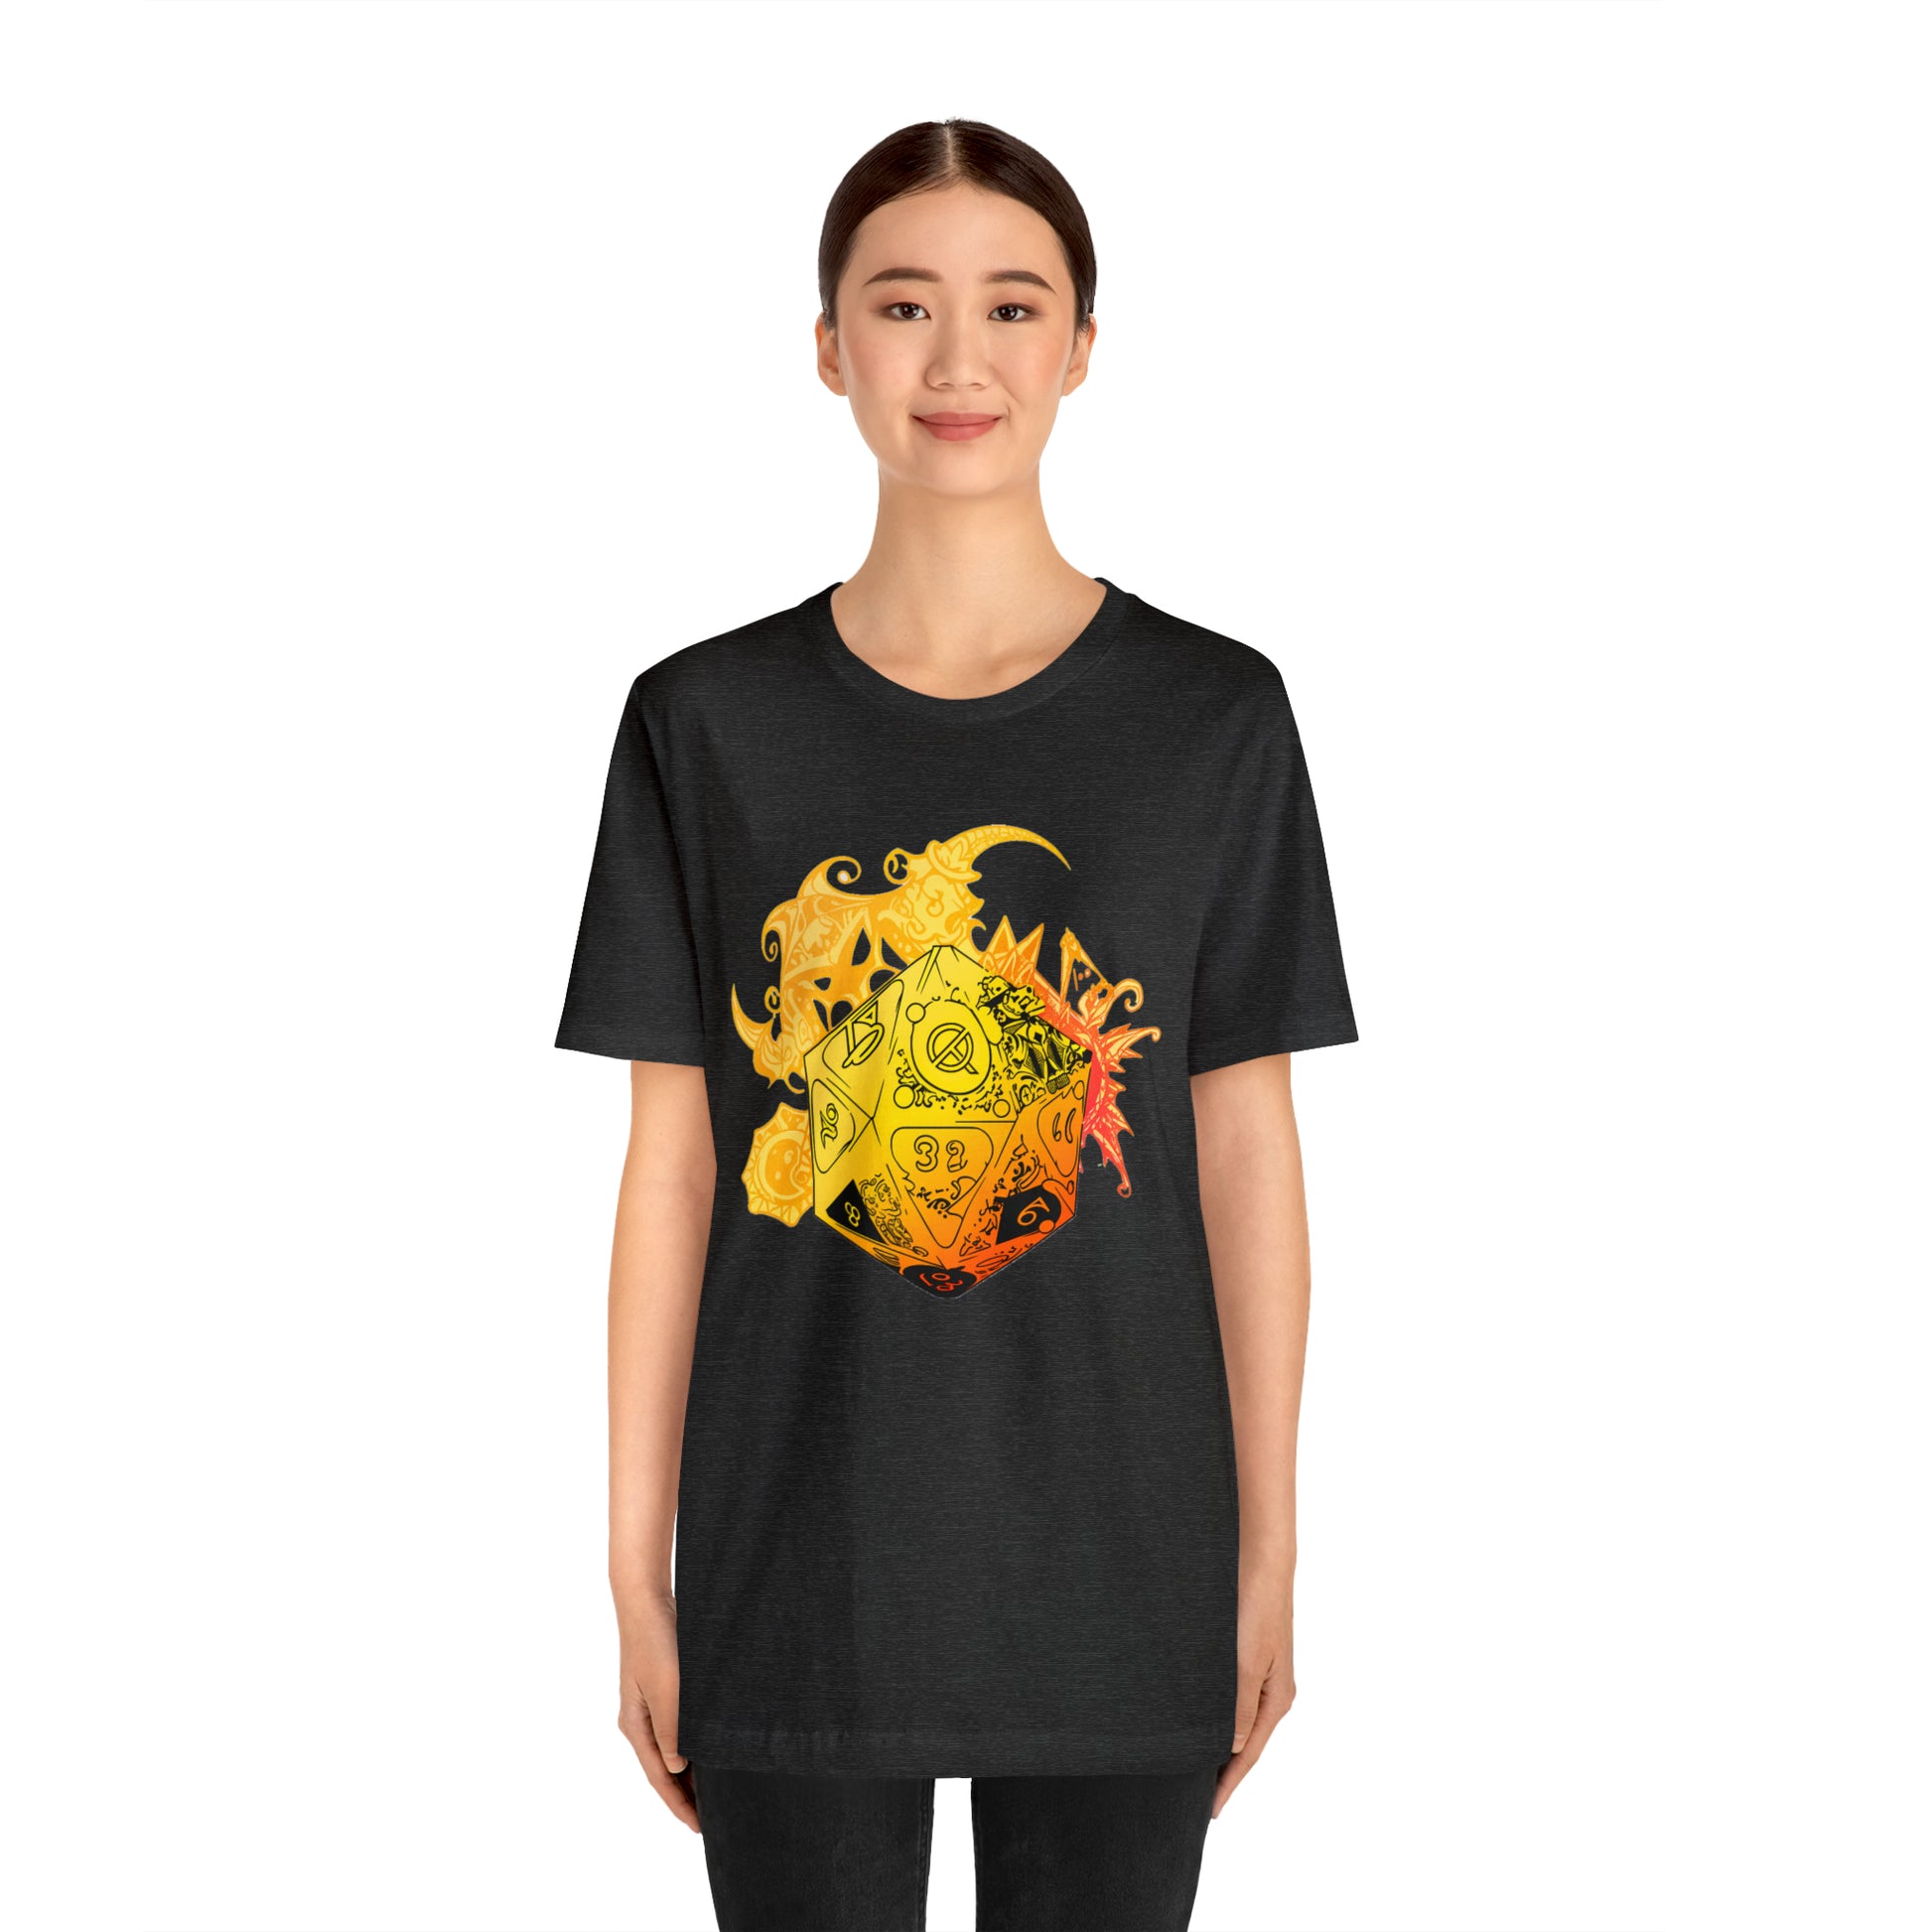 dark-grey-heather-quest-thread-tee-shirt-with-large-yellow-dragon-dice-on-center-of-shirt